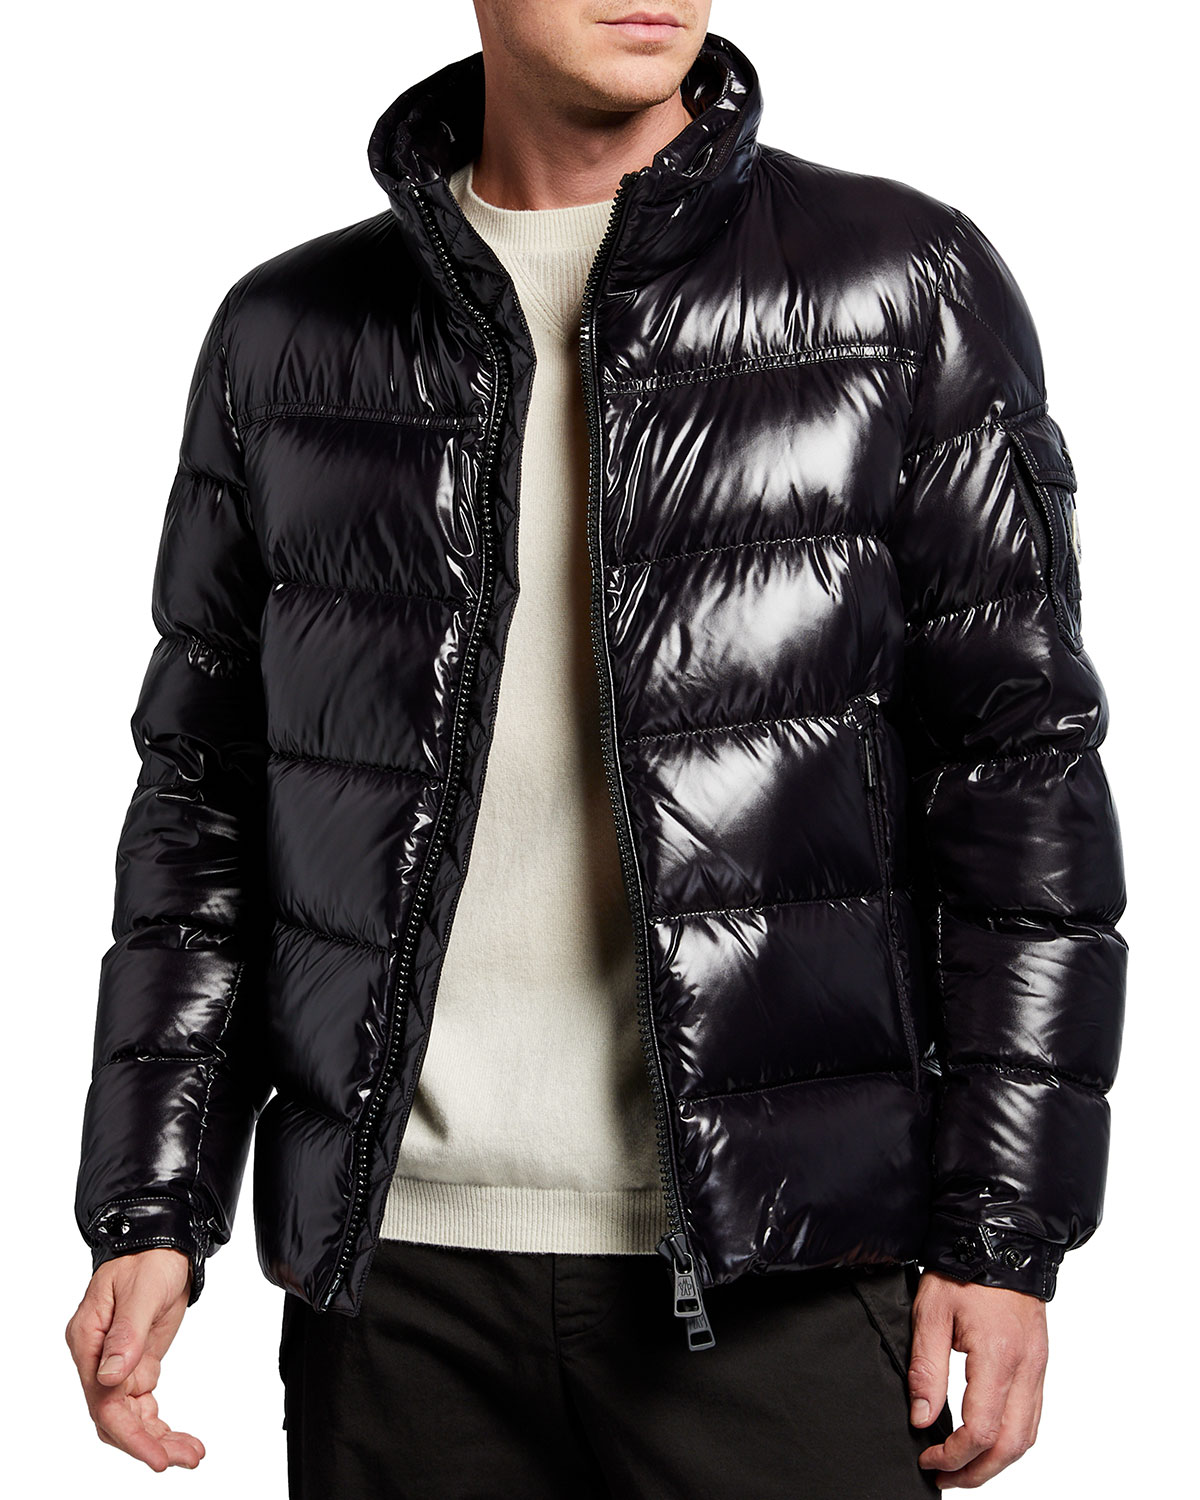 Best Men's Puffer Jacket Brands For All Budgets [2022 Guide]